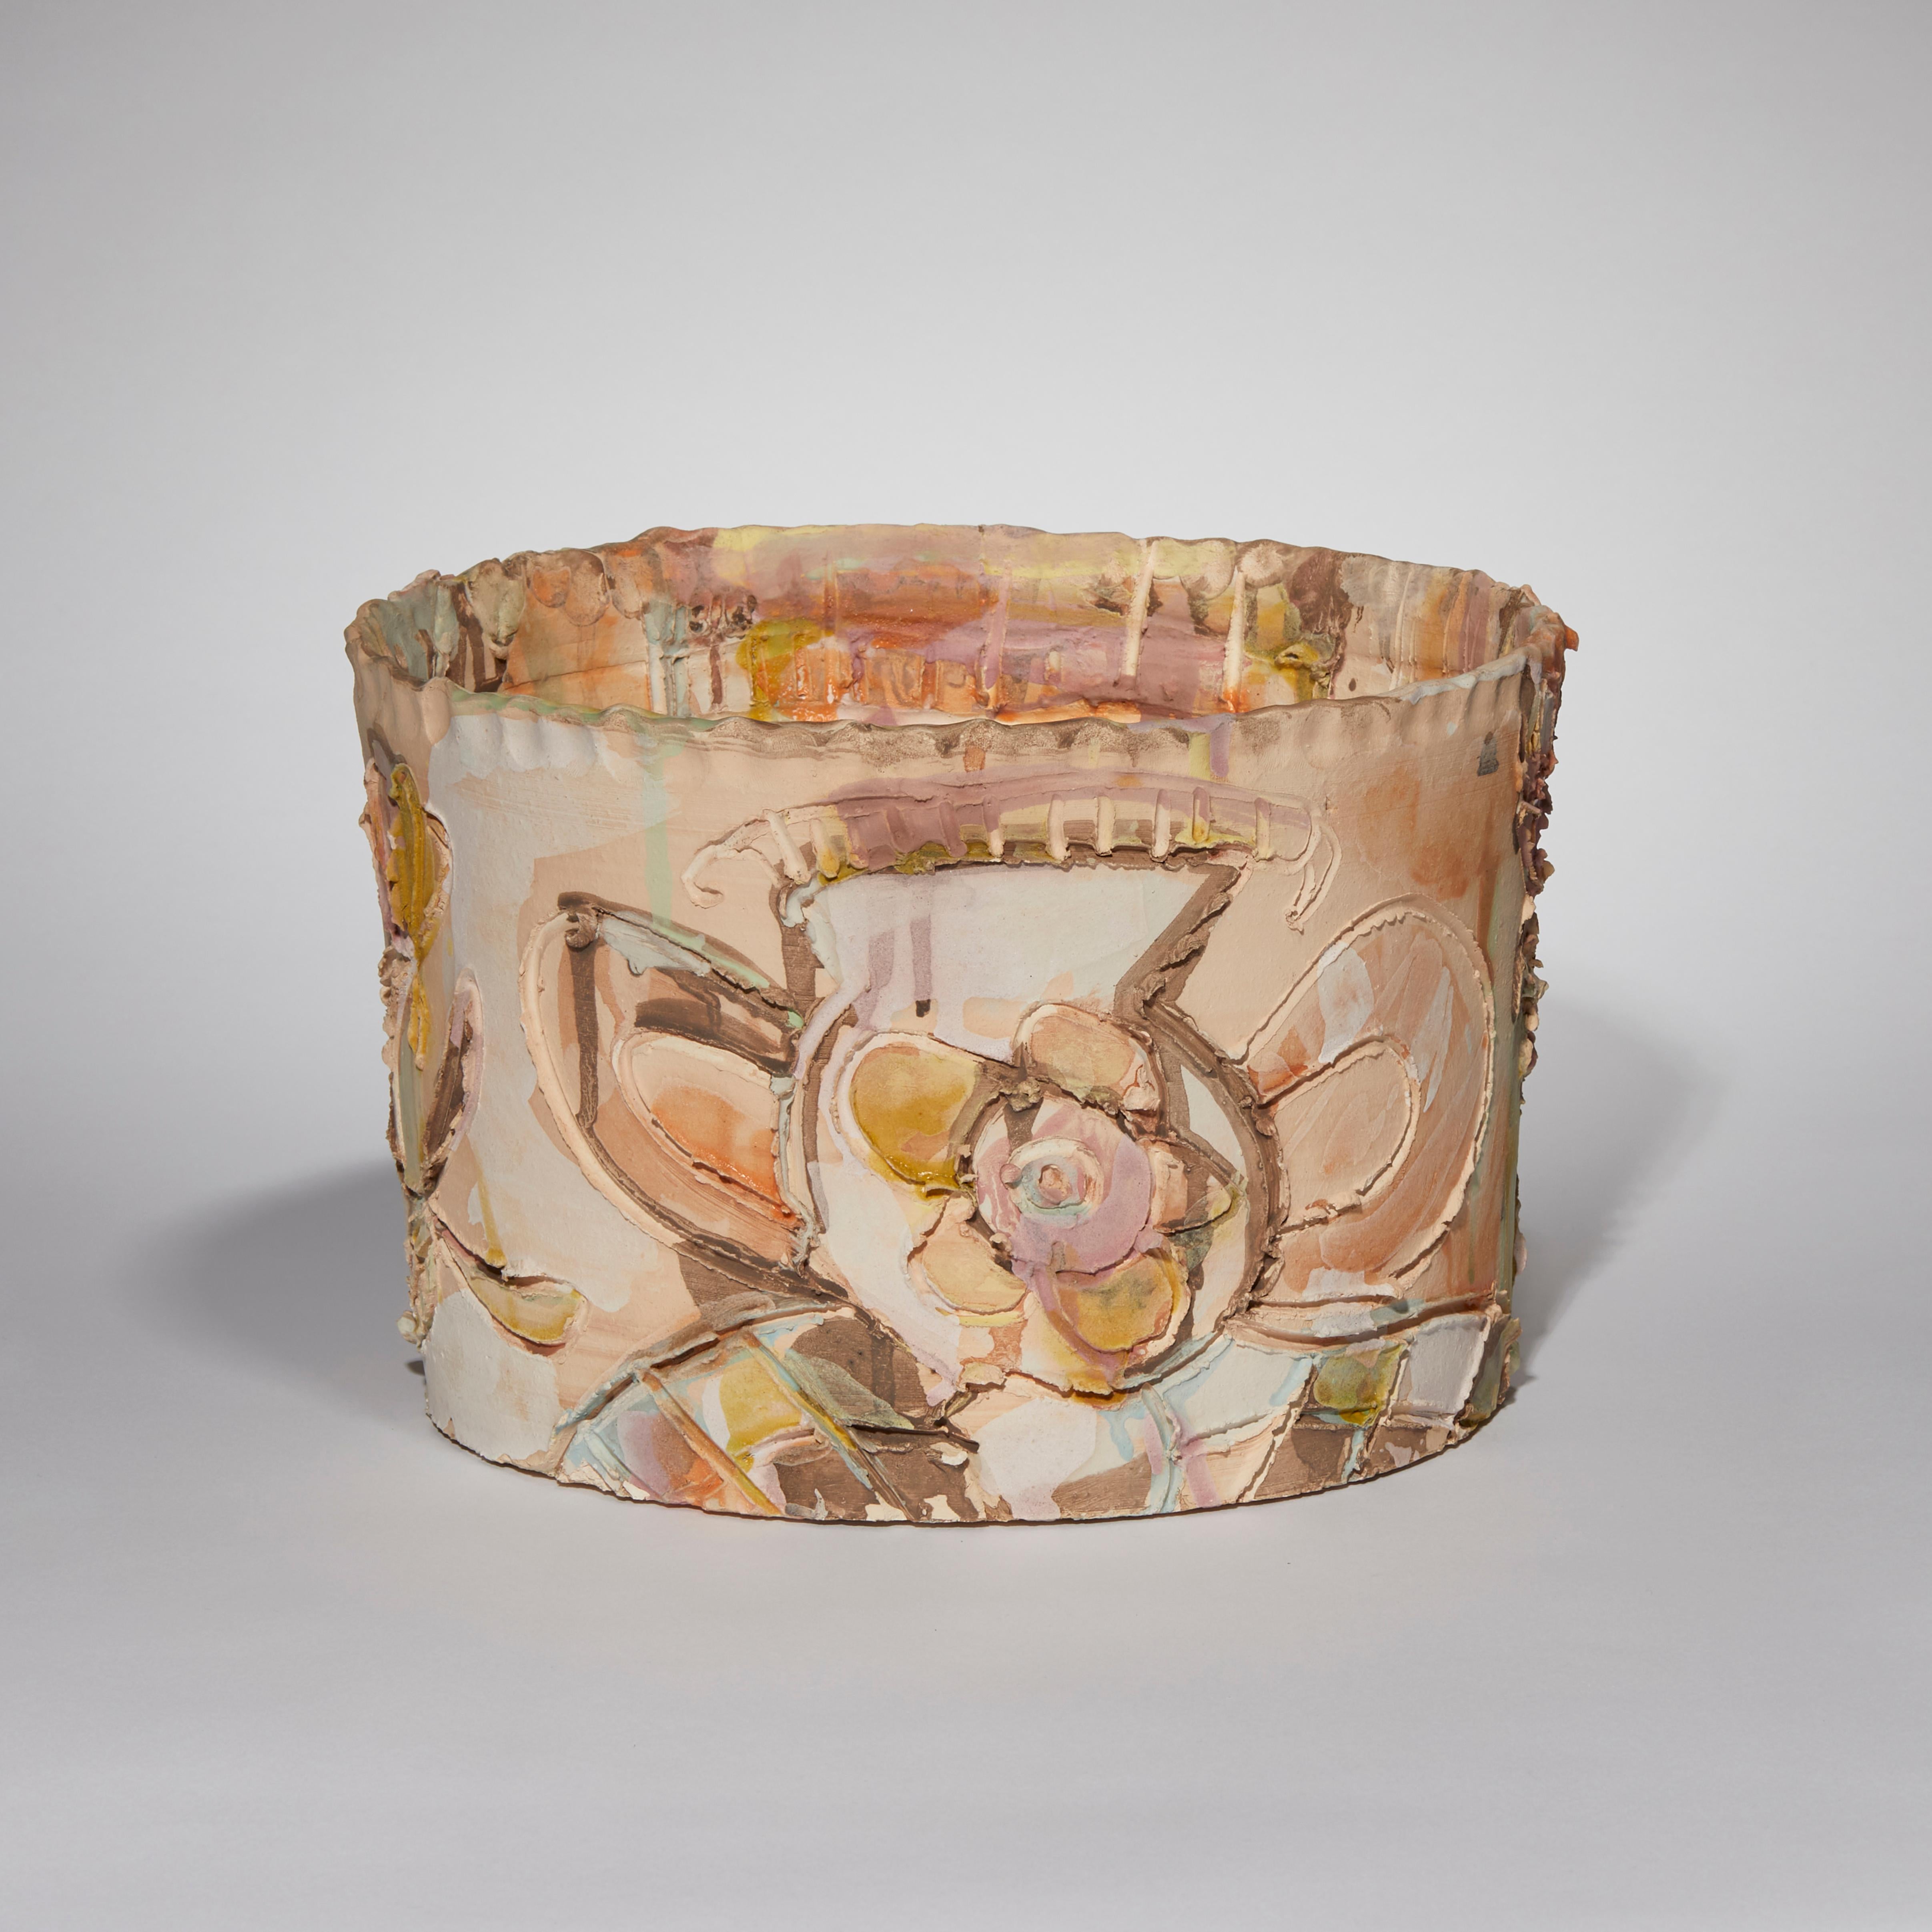 Hand-Crafted Blooming Fresco, a Ceramic Decorative Vase in Brown and Pink by Maarten Vrolijk For Sale